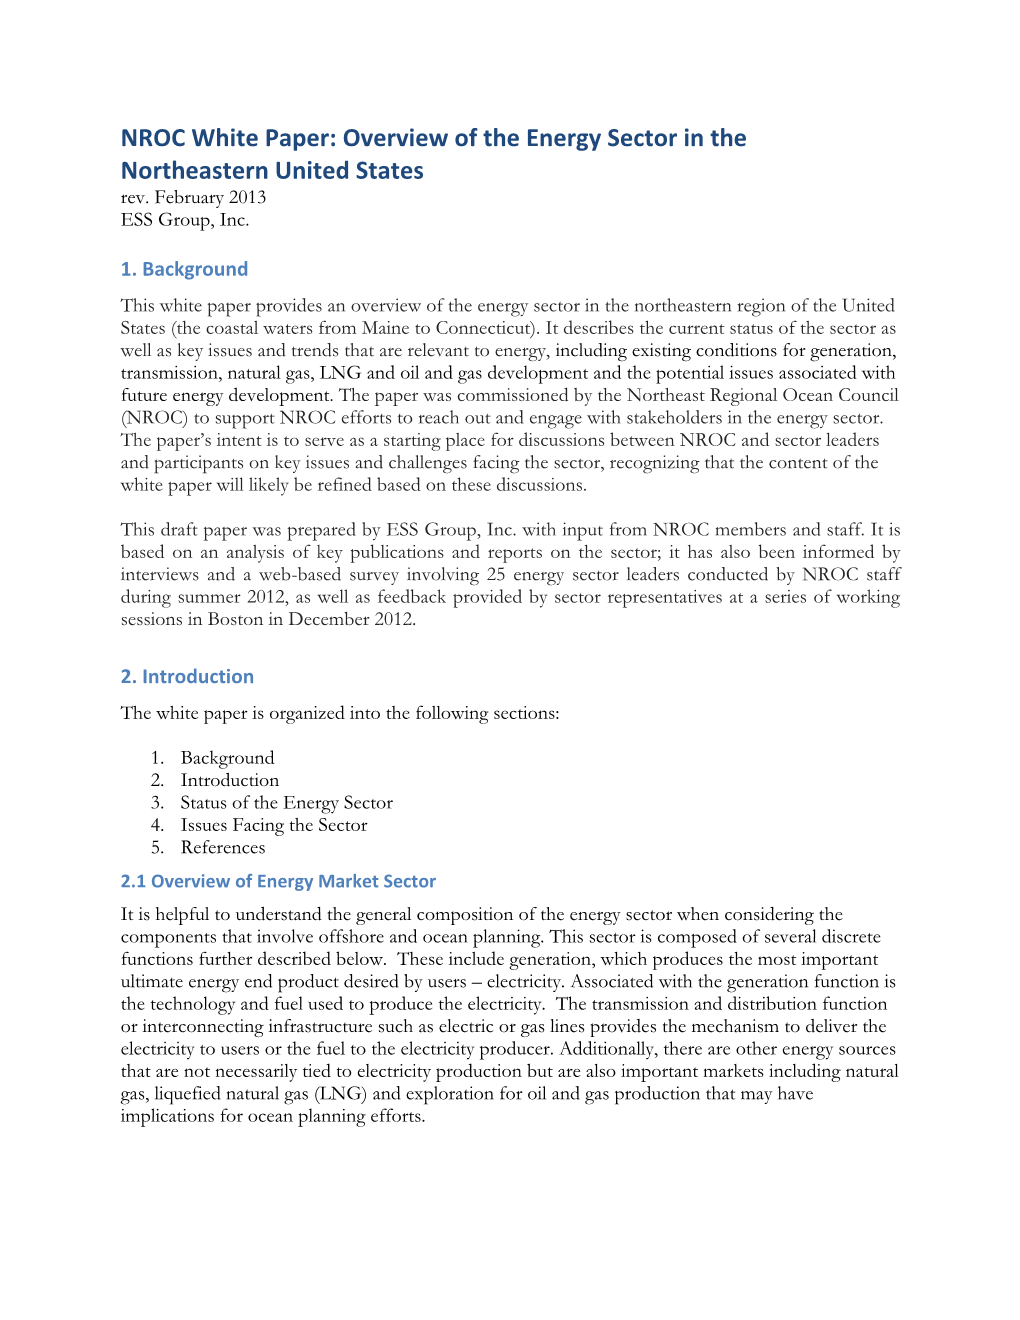 Energy Sector in the Northeastern United States Rev